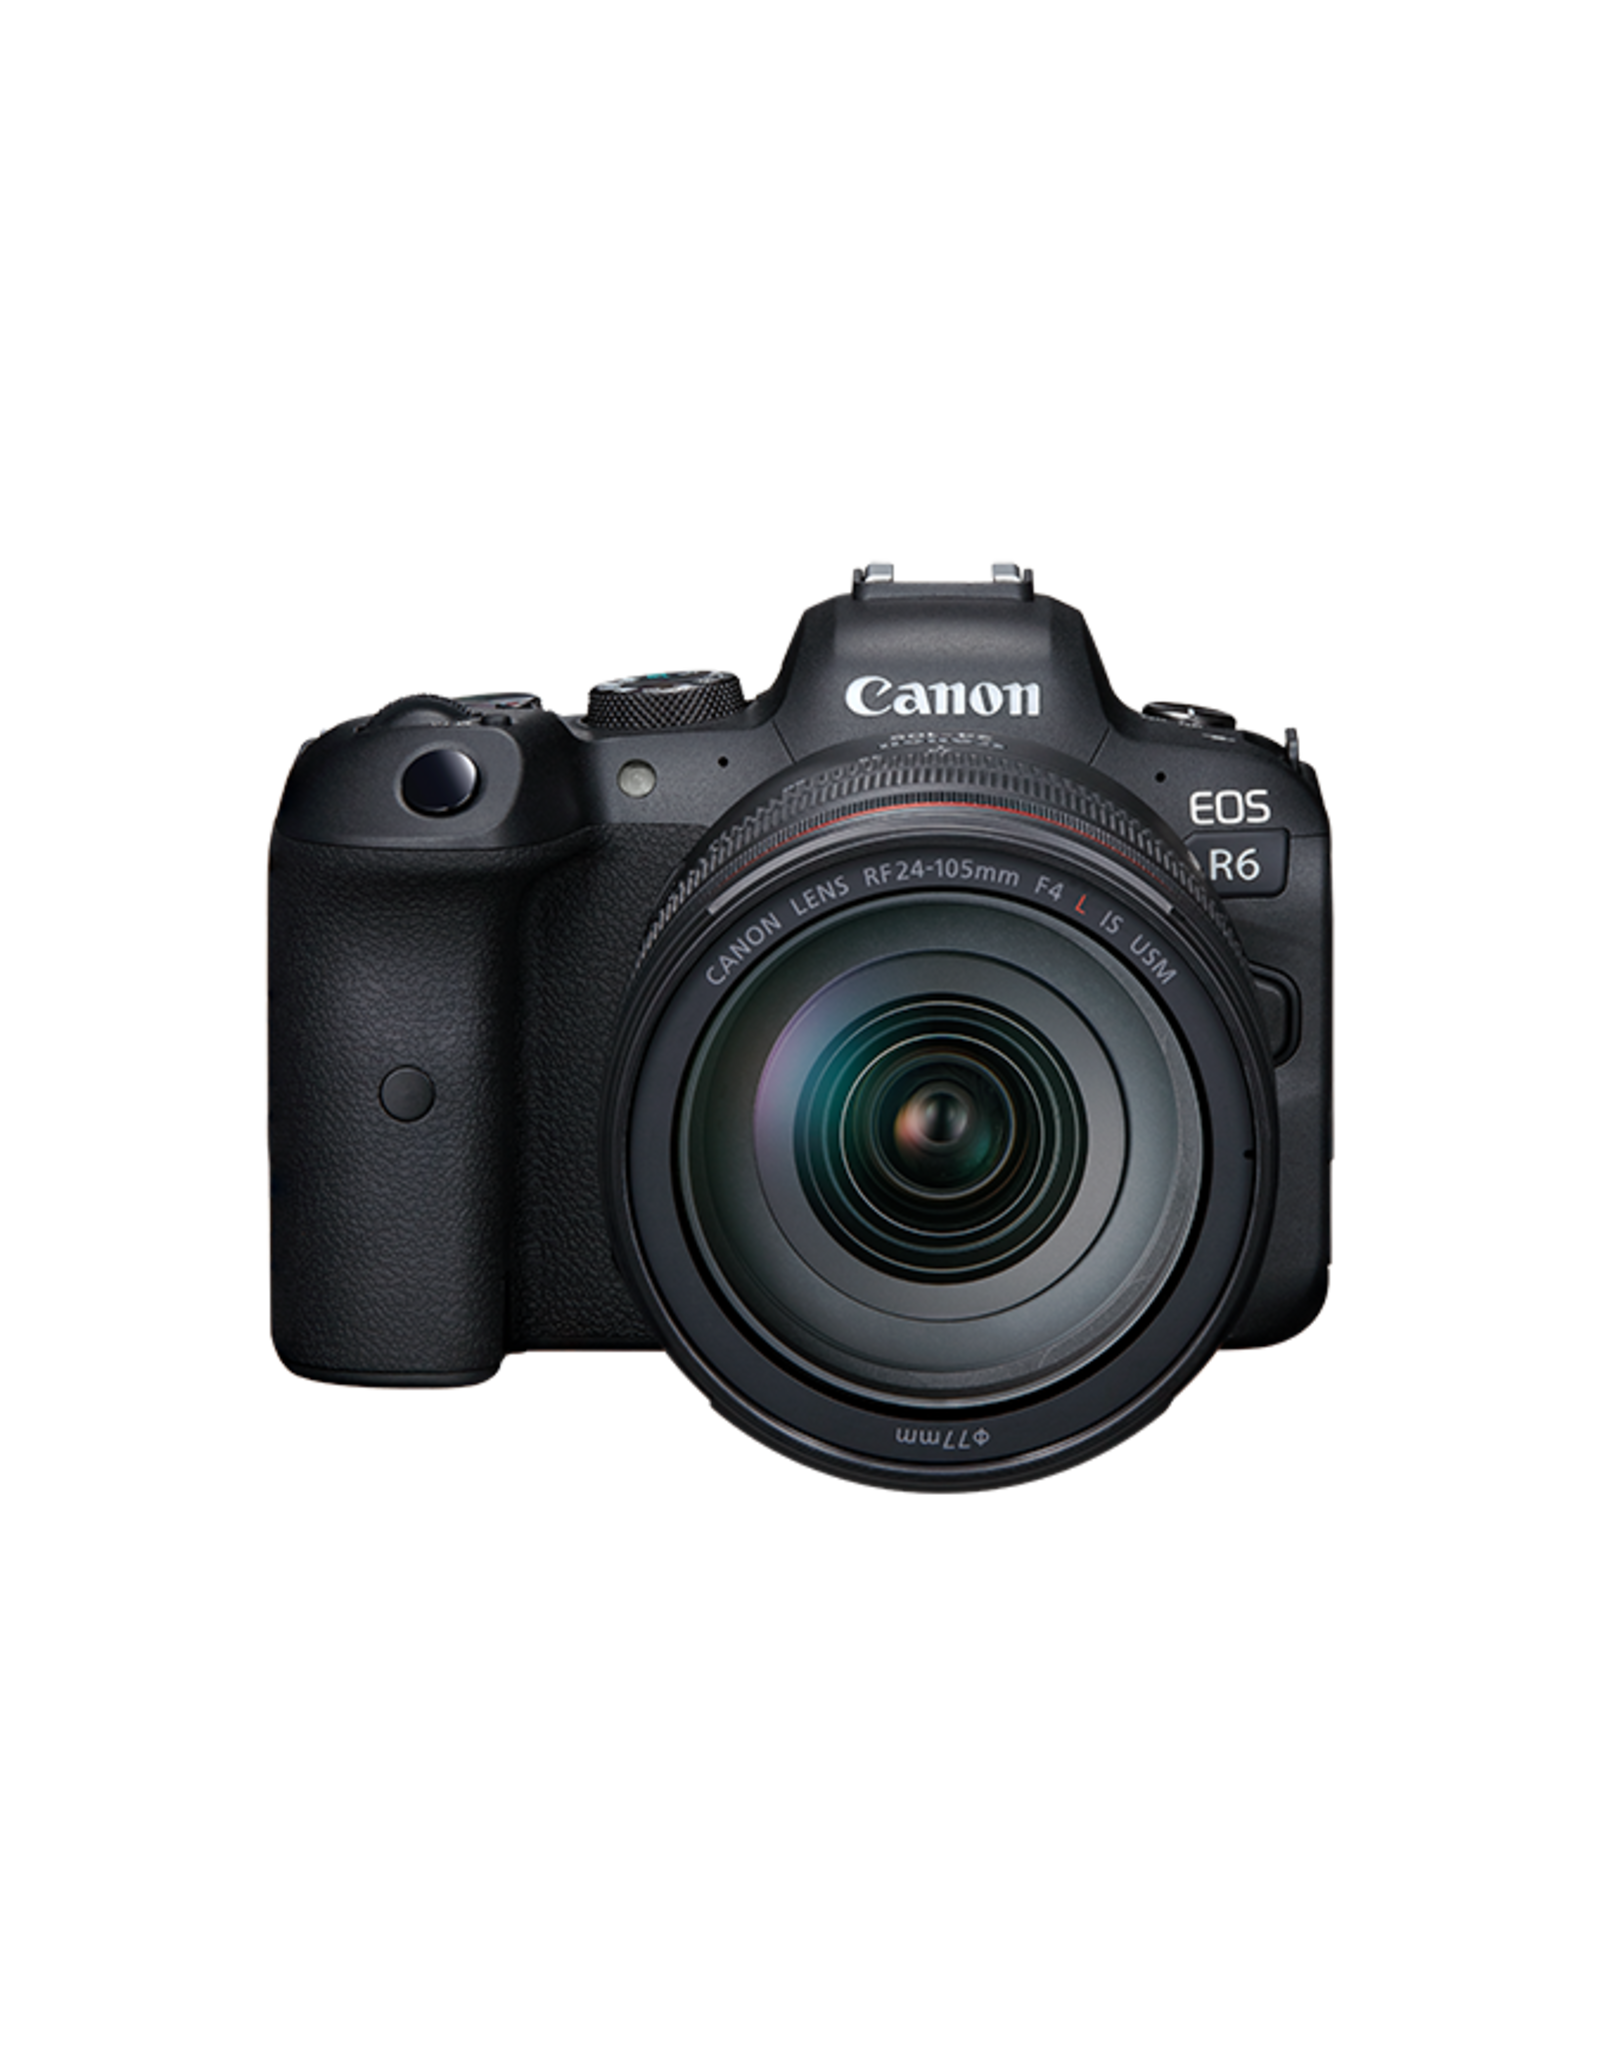 Canon Canon EOS R6 Mirrorless Camera with RF24-105mm Lens